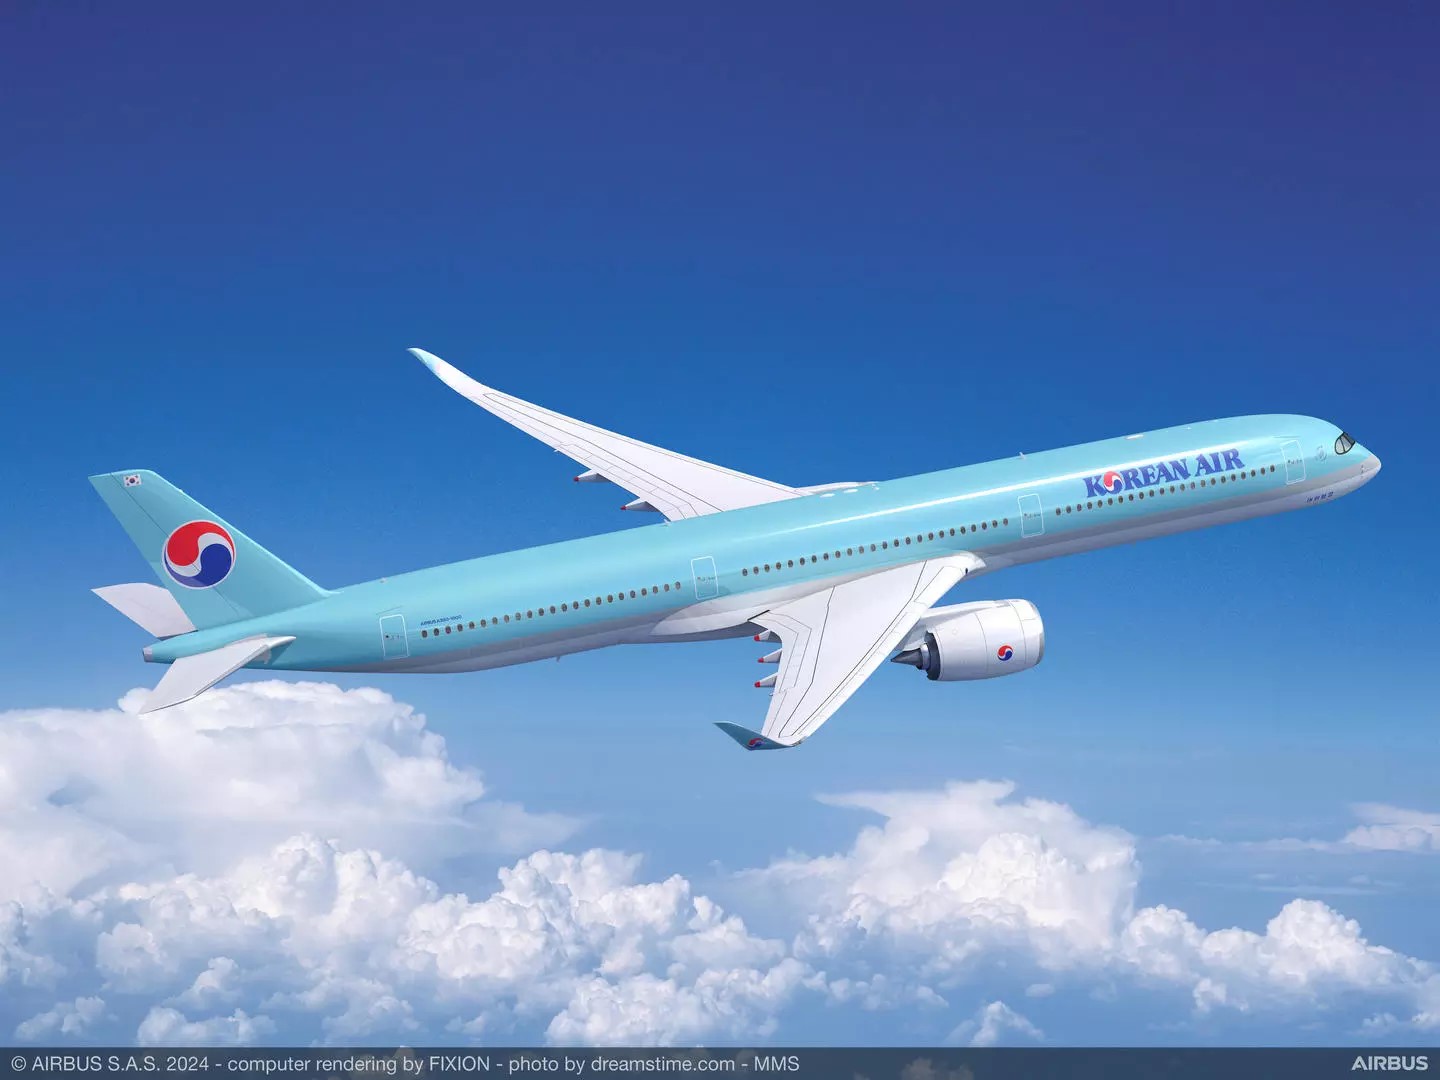 Airbus finalises order with Korean Air for 33 A350s